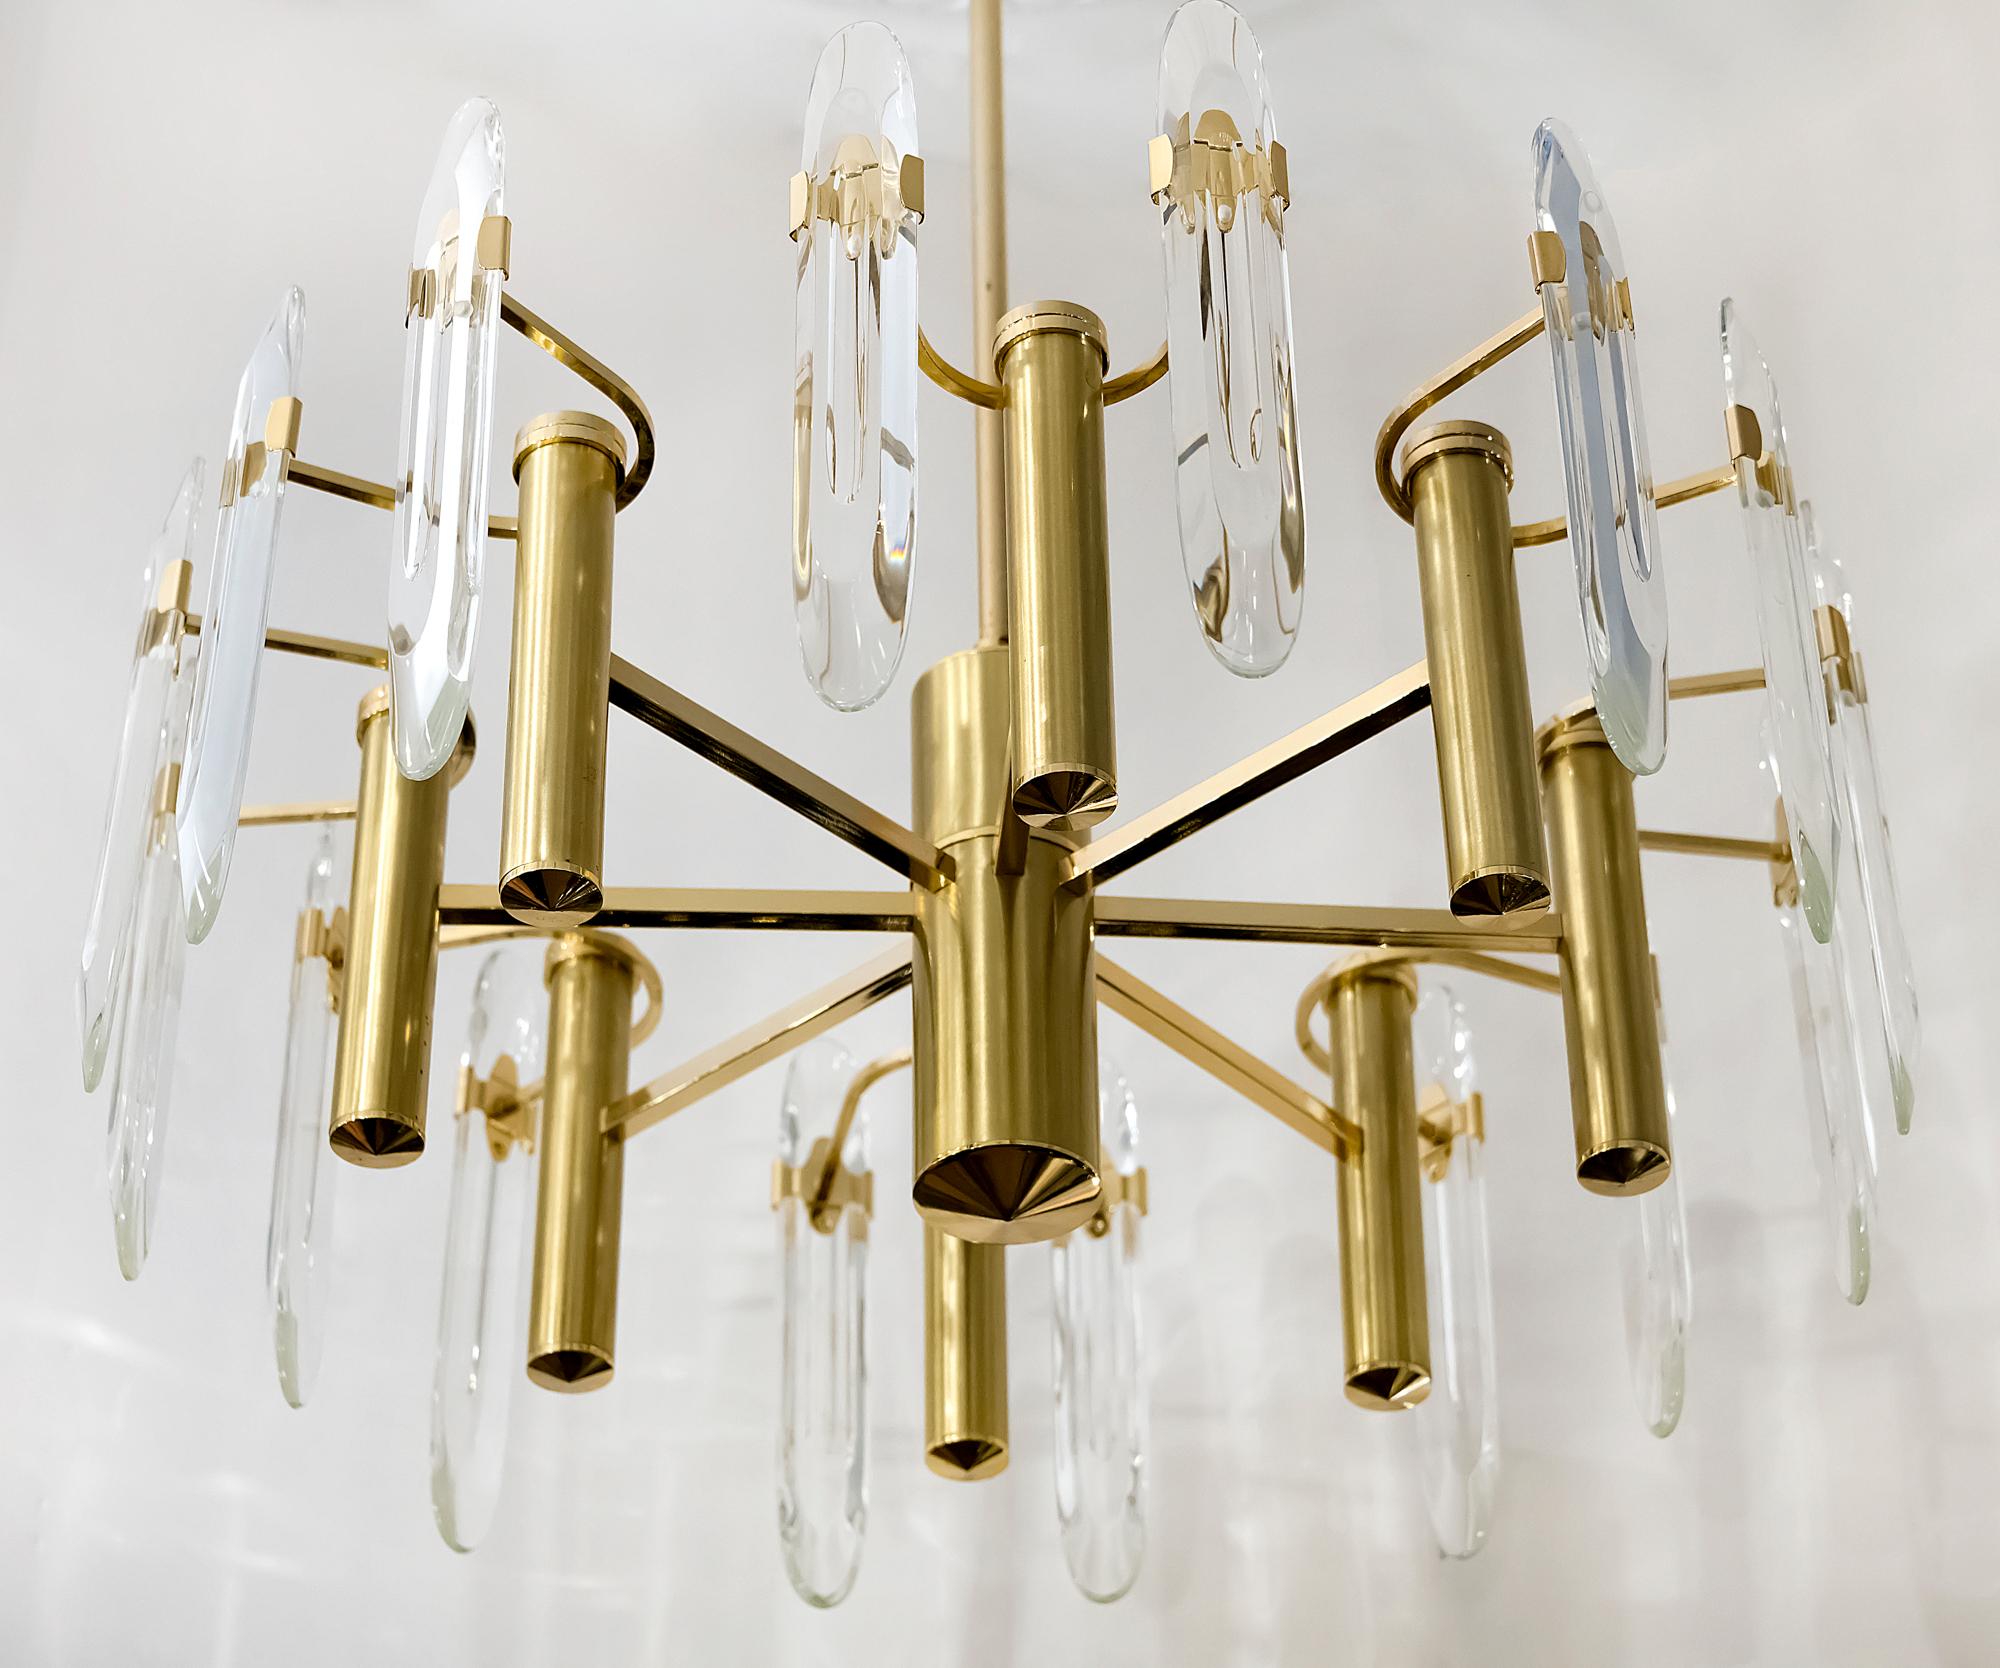 Italian midcentury Sciolari chandelier is made of brass and clear glass in the holders. This chandelier includes 8 pcs. E27 bulbs. It is in a very good original vintage condition.

 